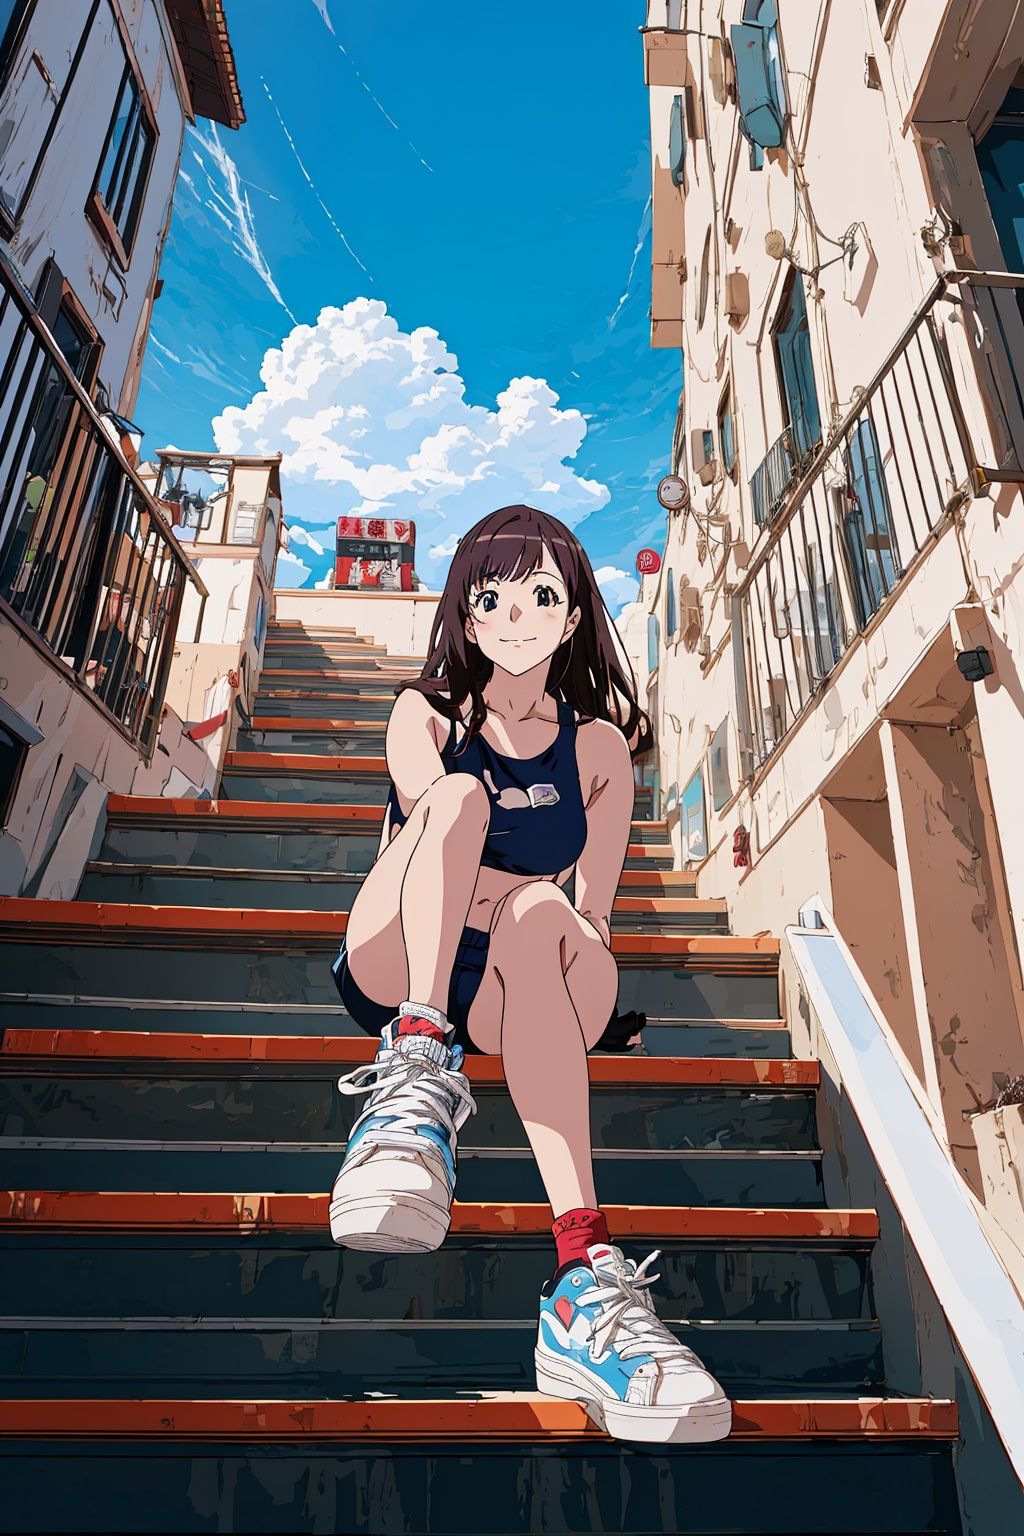 a woman on top of stairs with sneakers, in the style of anime art, dazzling cityscapes, hyper-realistic portraits, chinapunk, anime, street scene,lowangle